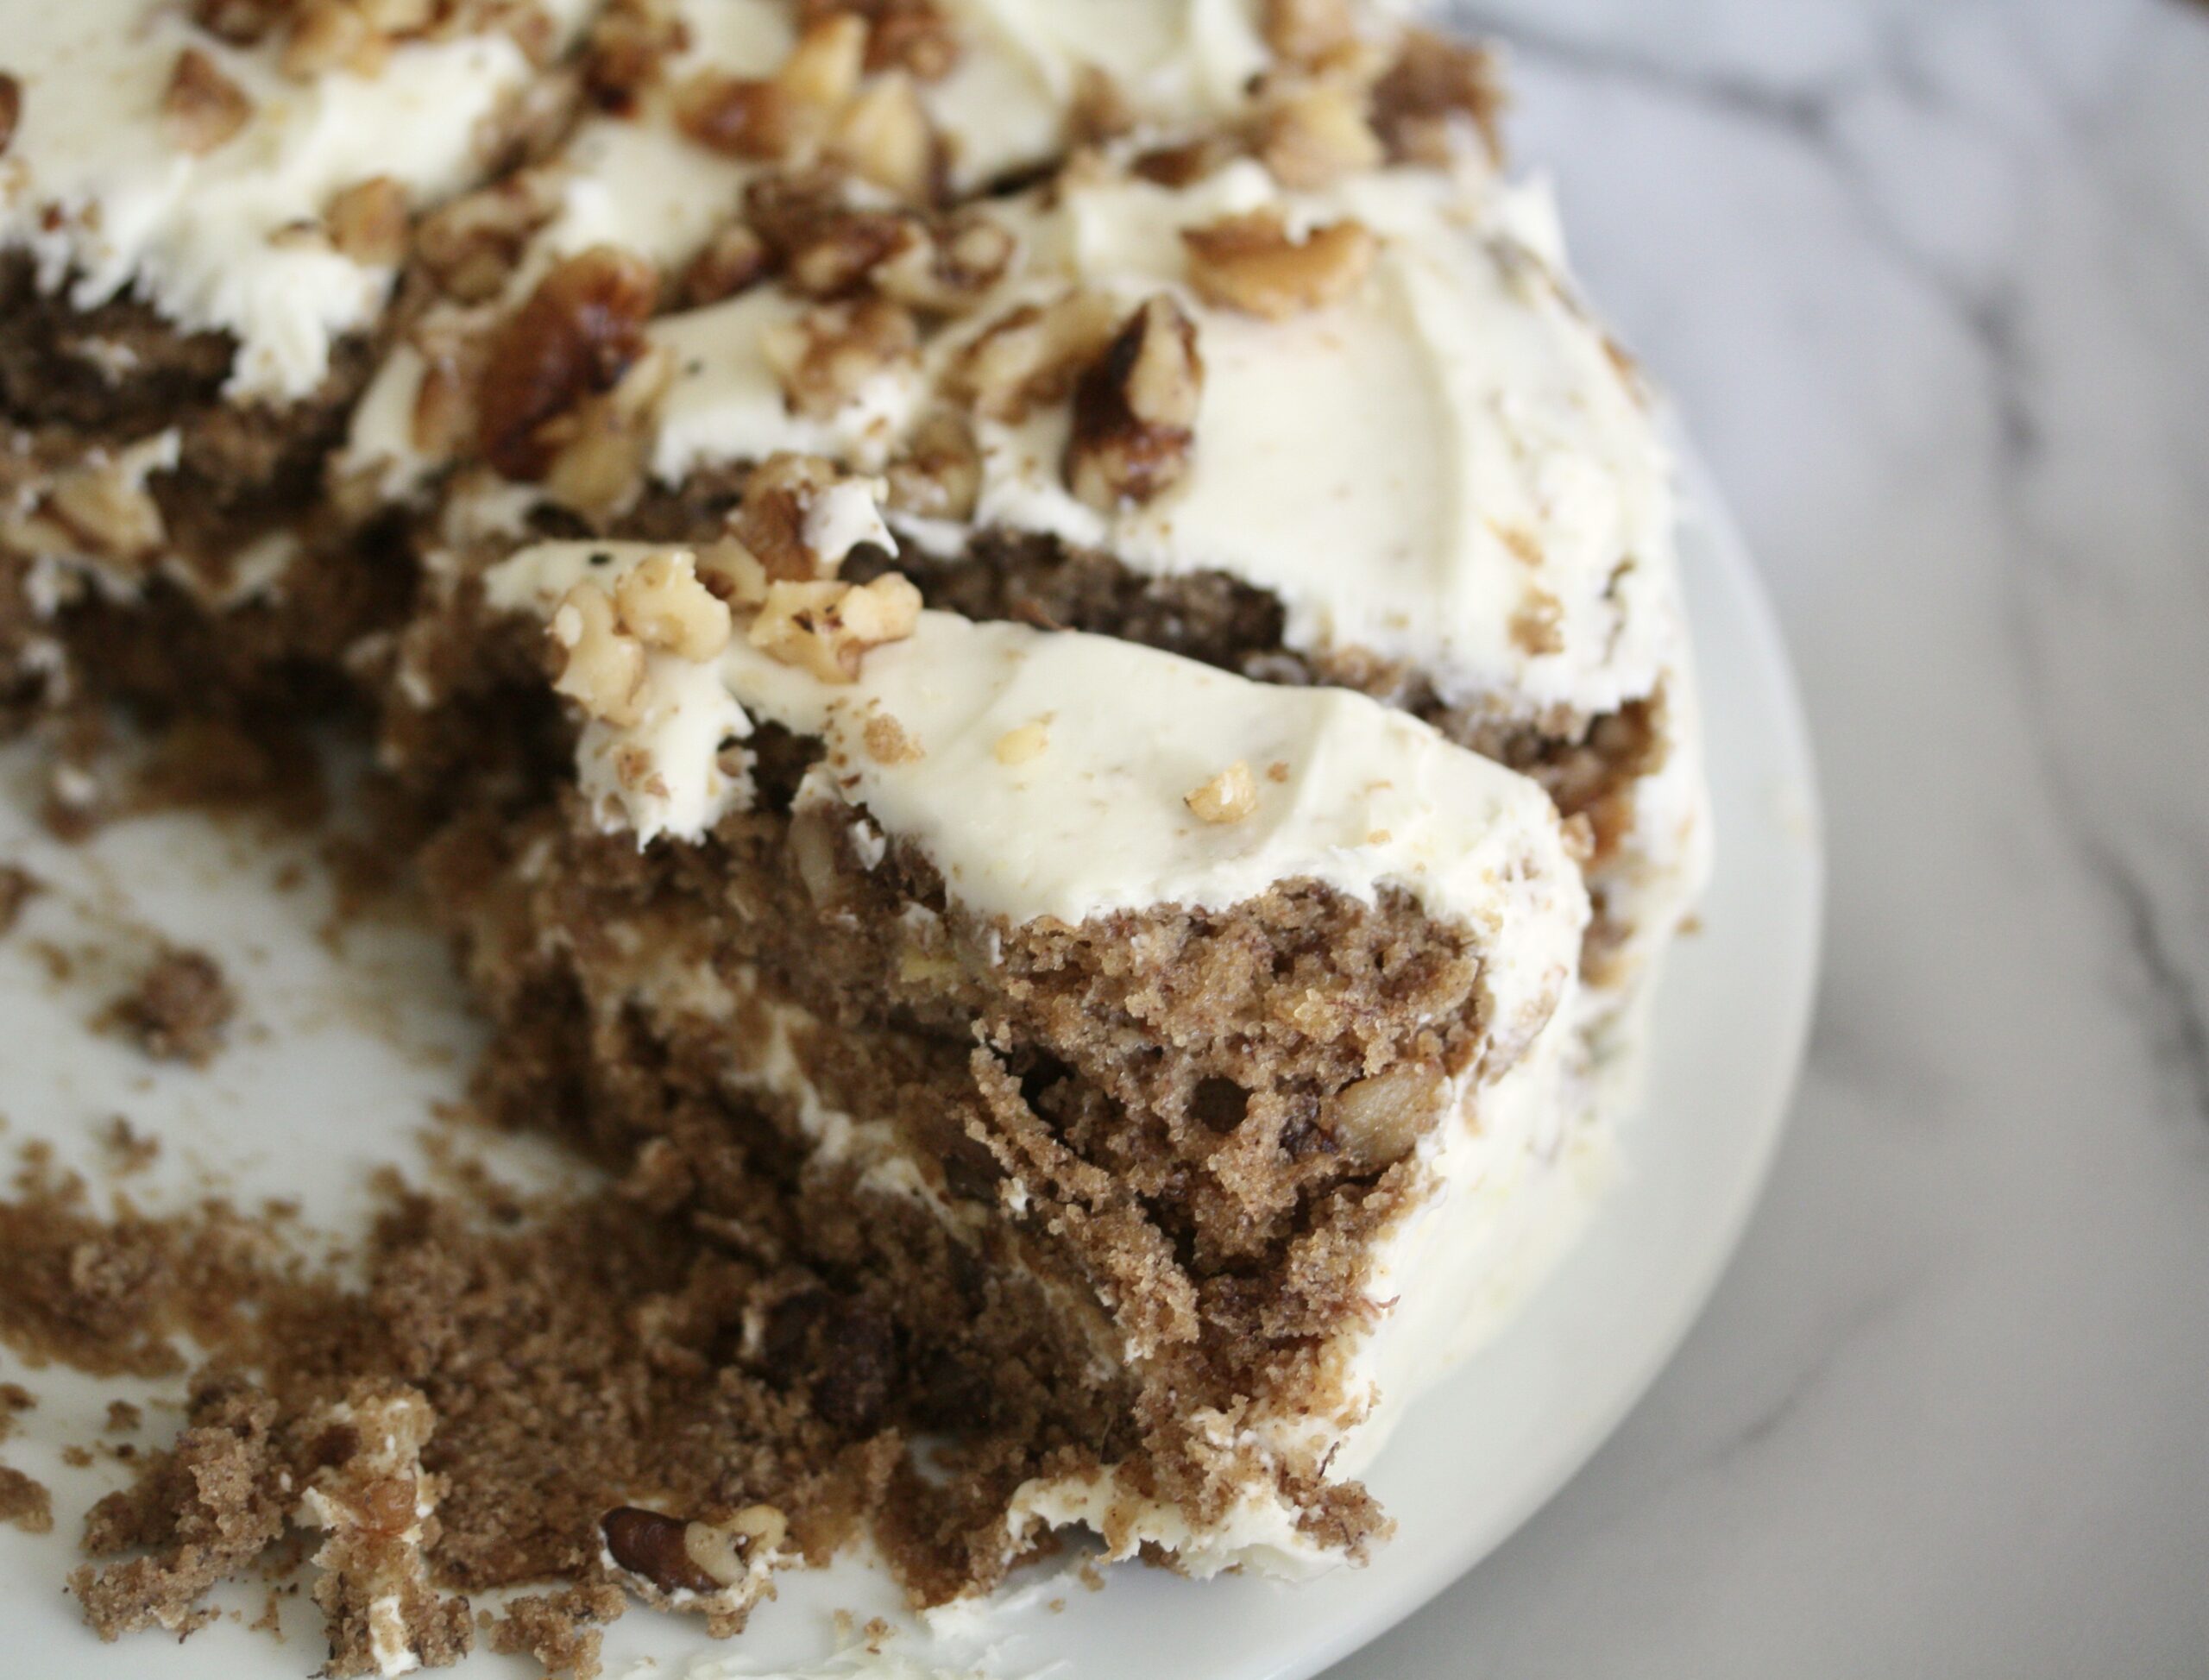 Slices of gluten-free hummingbird cake on a plate.